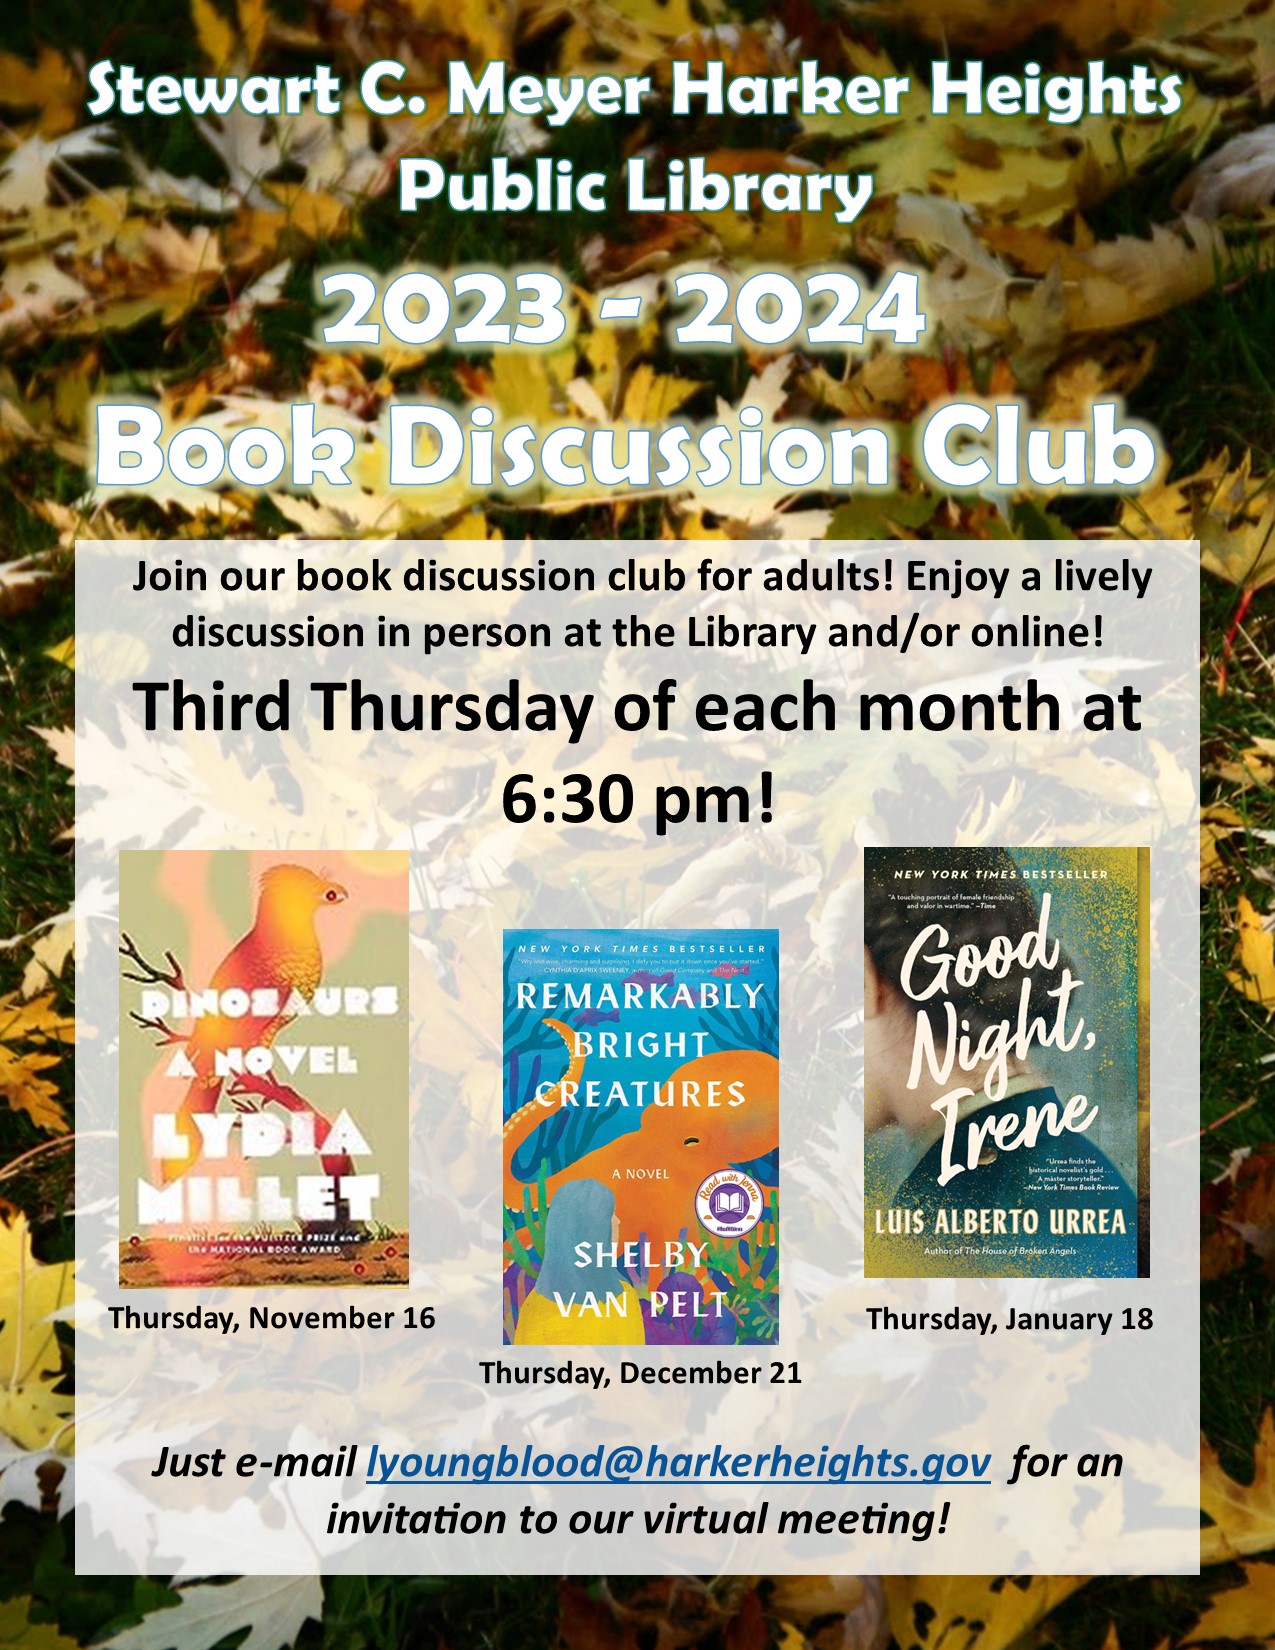 book discussion club november 2023 through january 2024